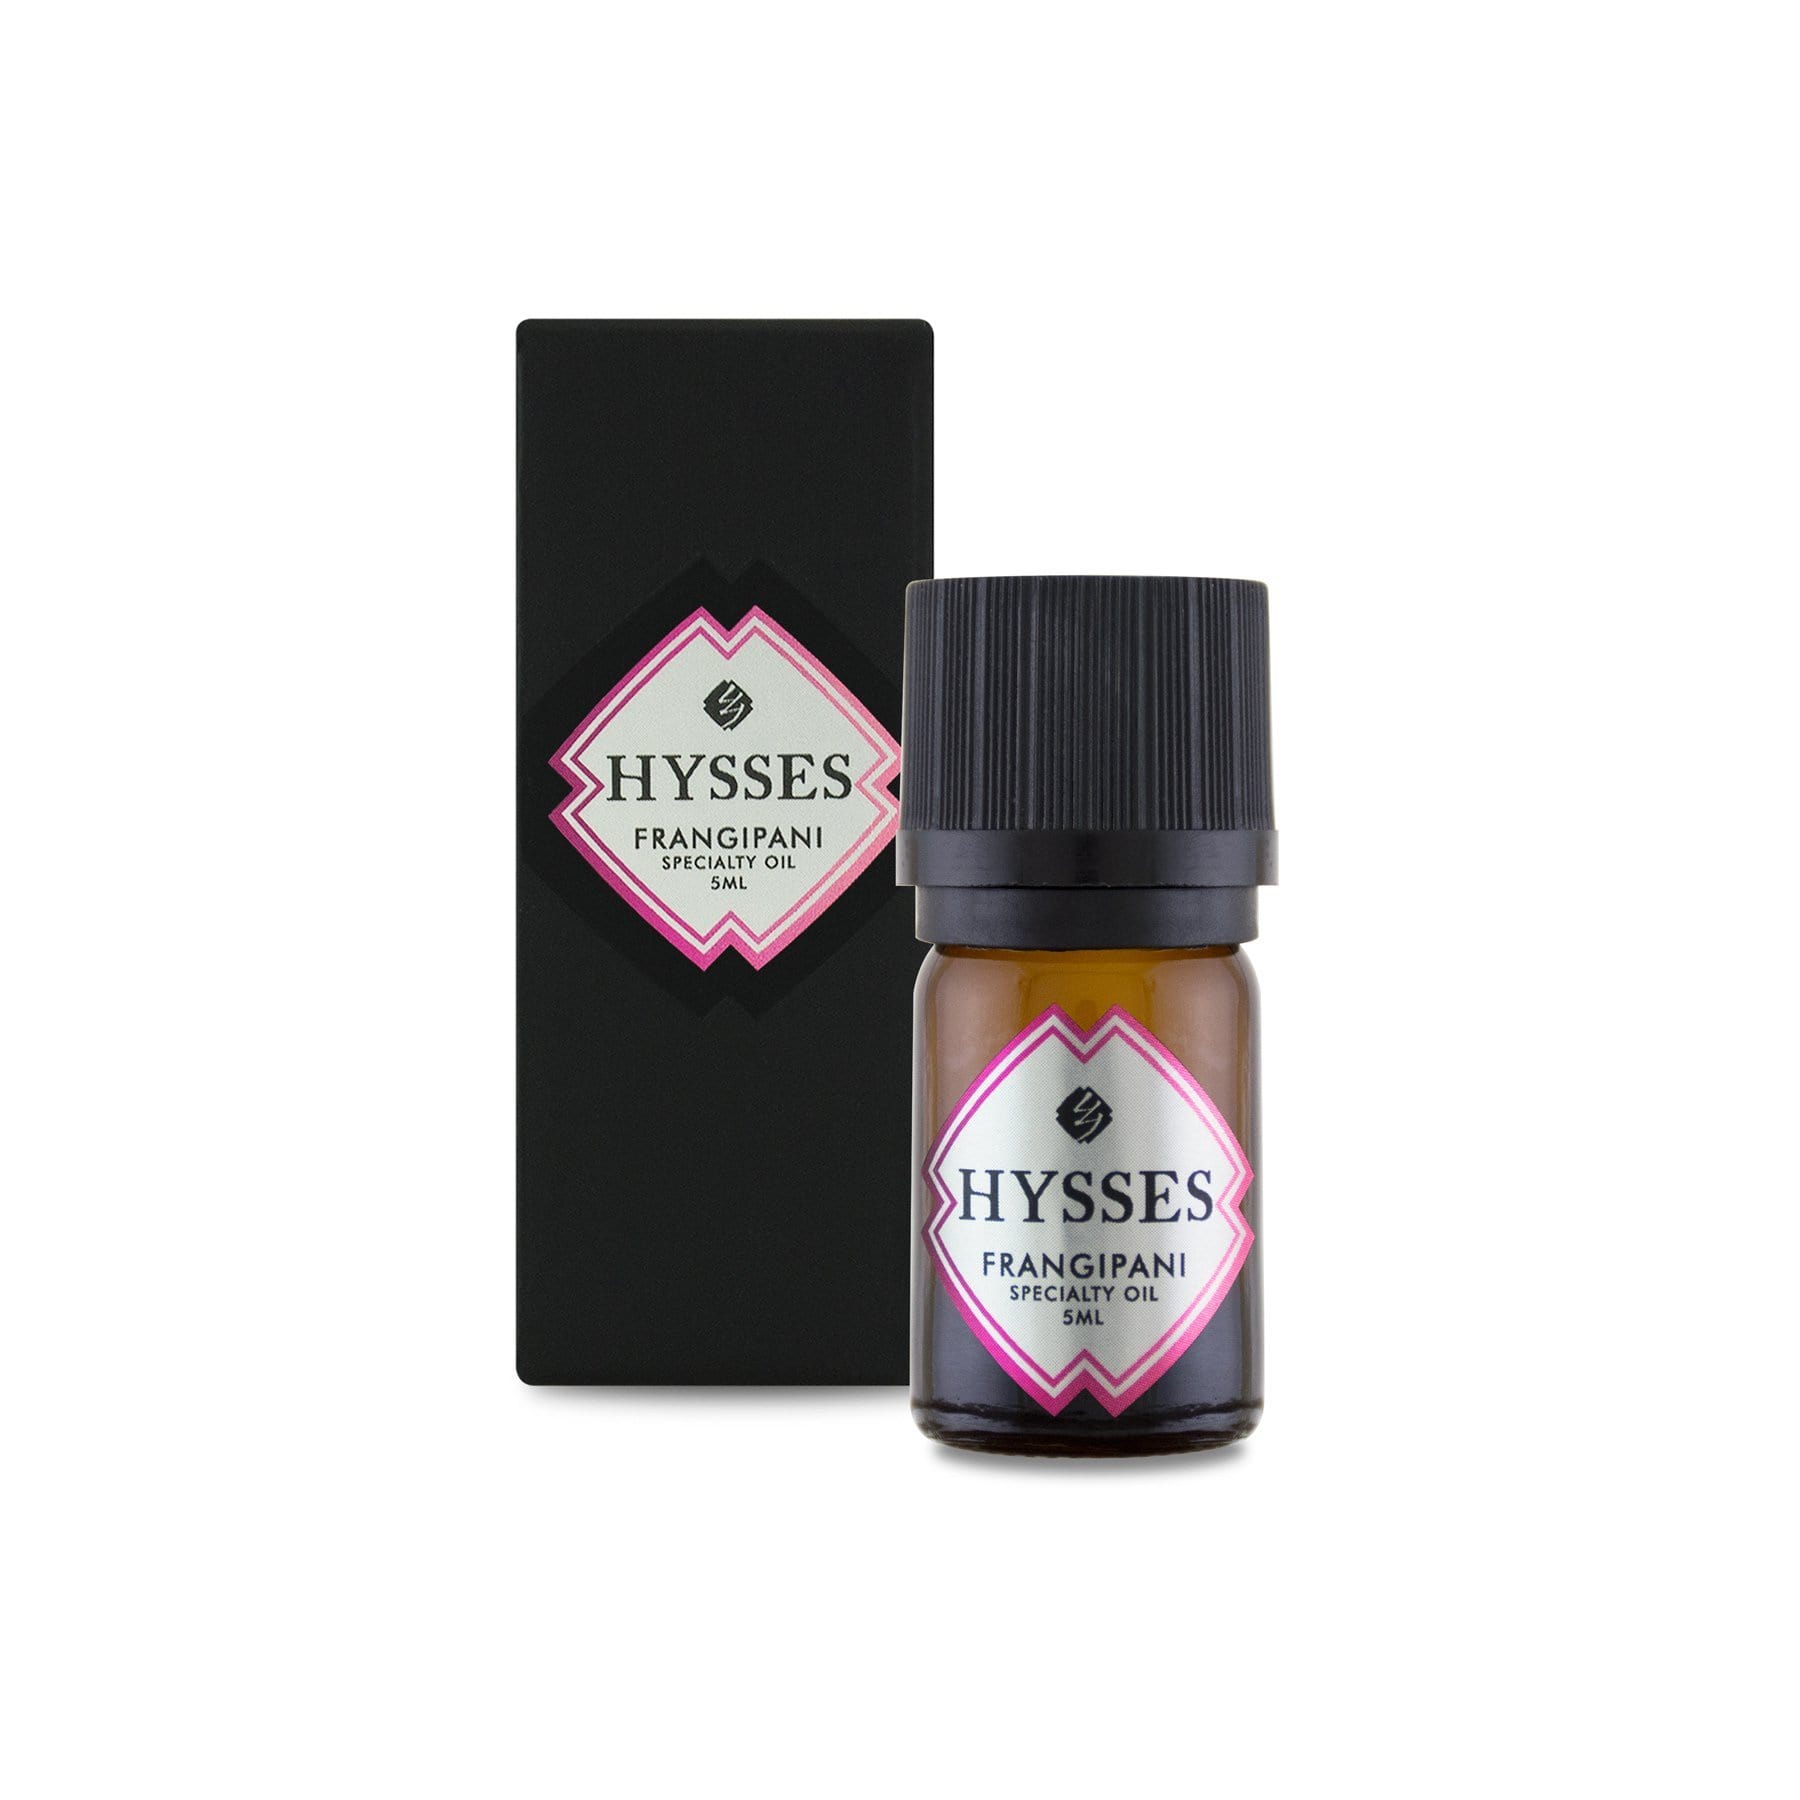 Hysses Essential Oil Specialty Oil Frangipani Absolute (25%) in Ethanol, 5ml